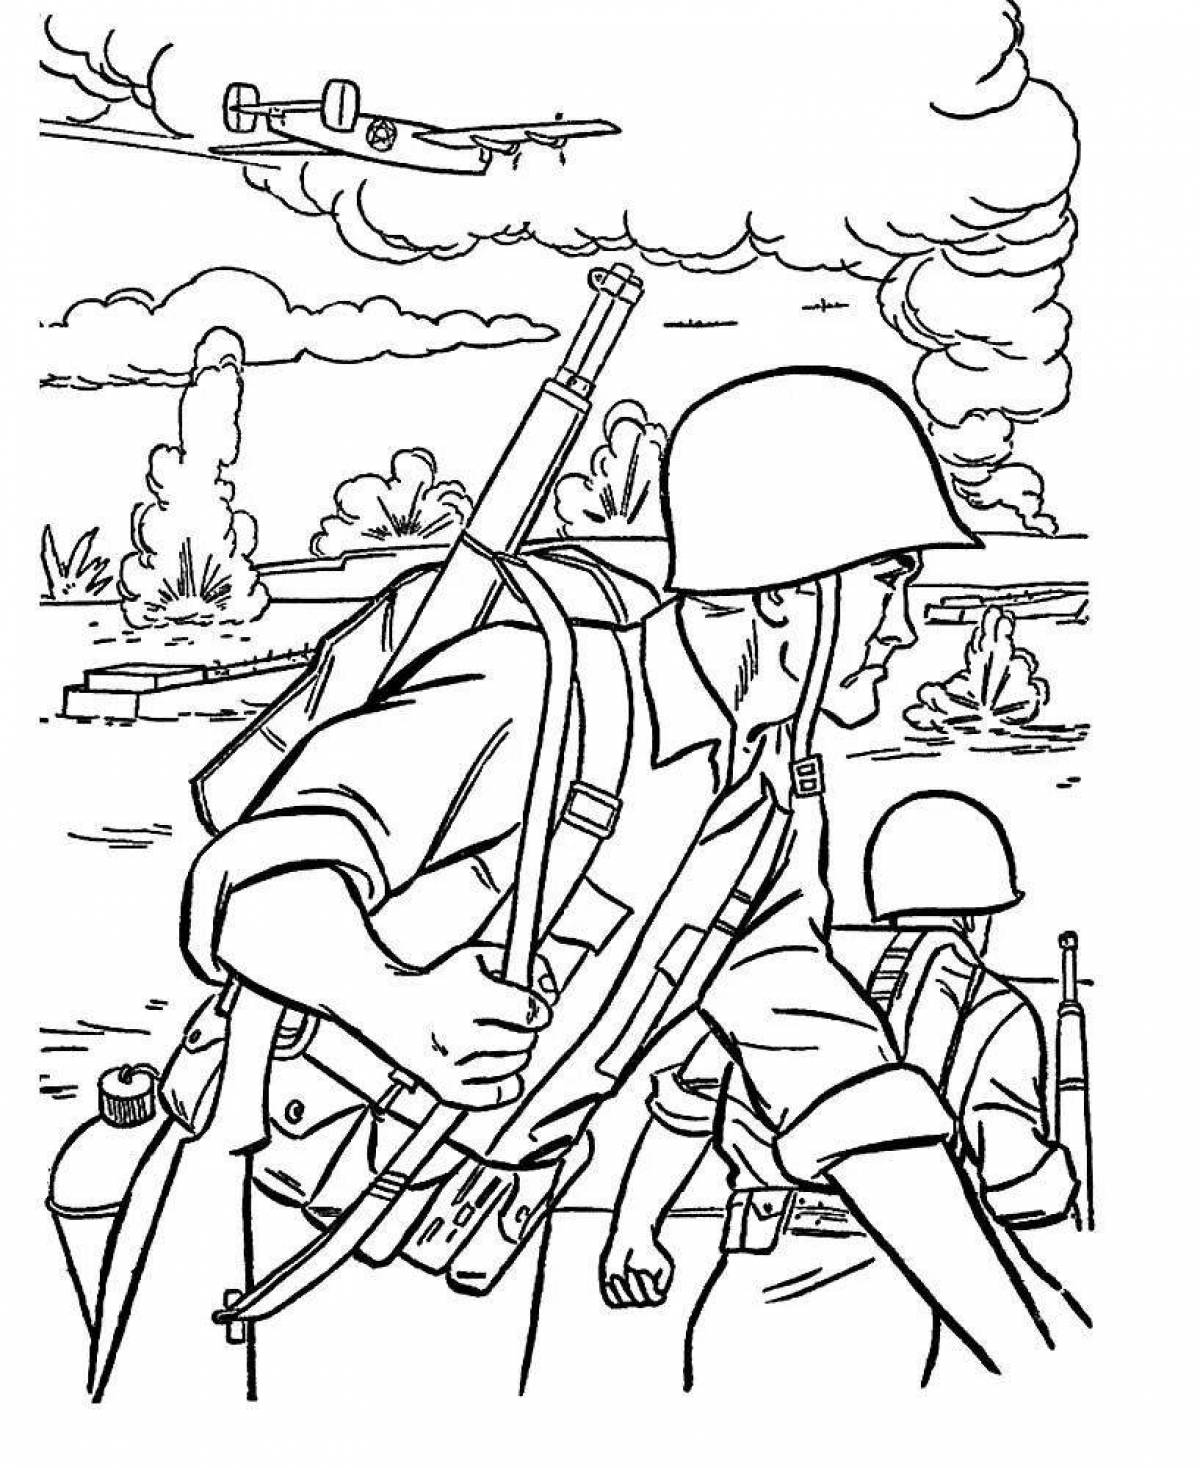 Soldiers at war #1